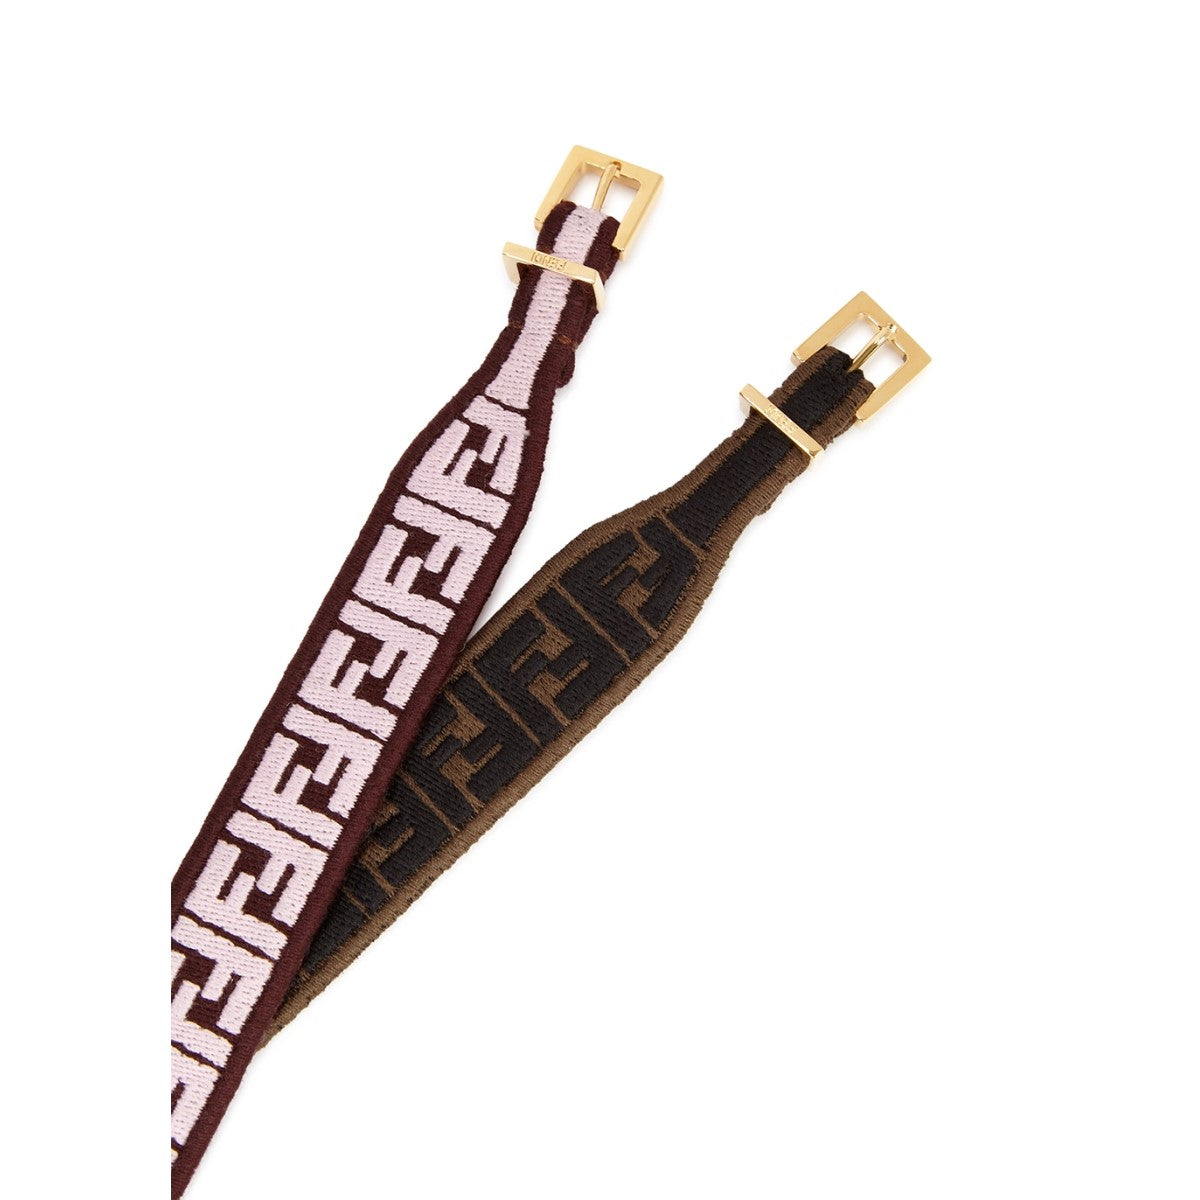 Fendi FF Embroidered Brown Lavender Kit Bracelet 8AH245 at_Queen_Bee_of_Beverly_Hills